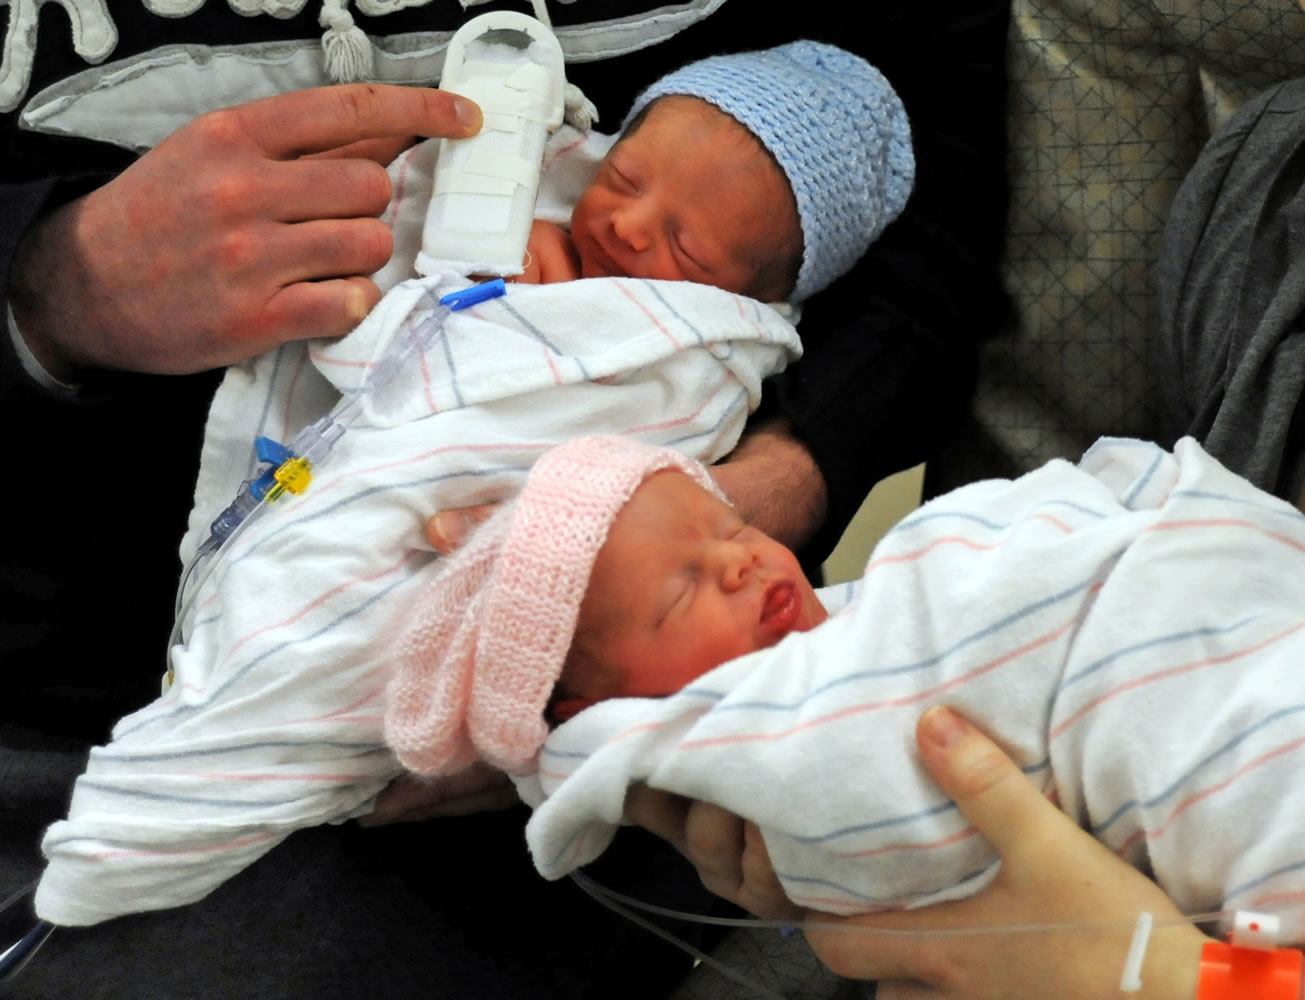 Parents hold their twin newborns at the Hennepin County Medical Center in Minneapolis.